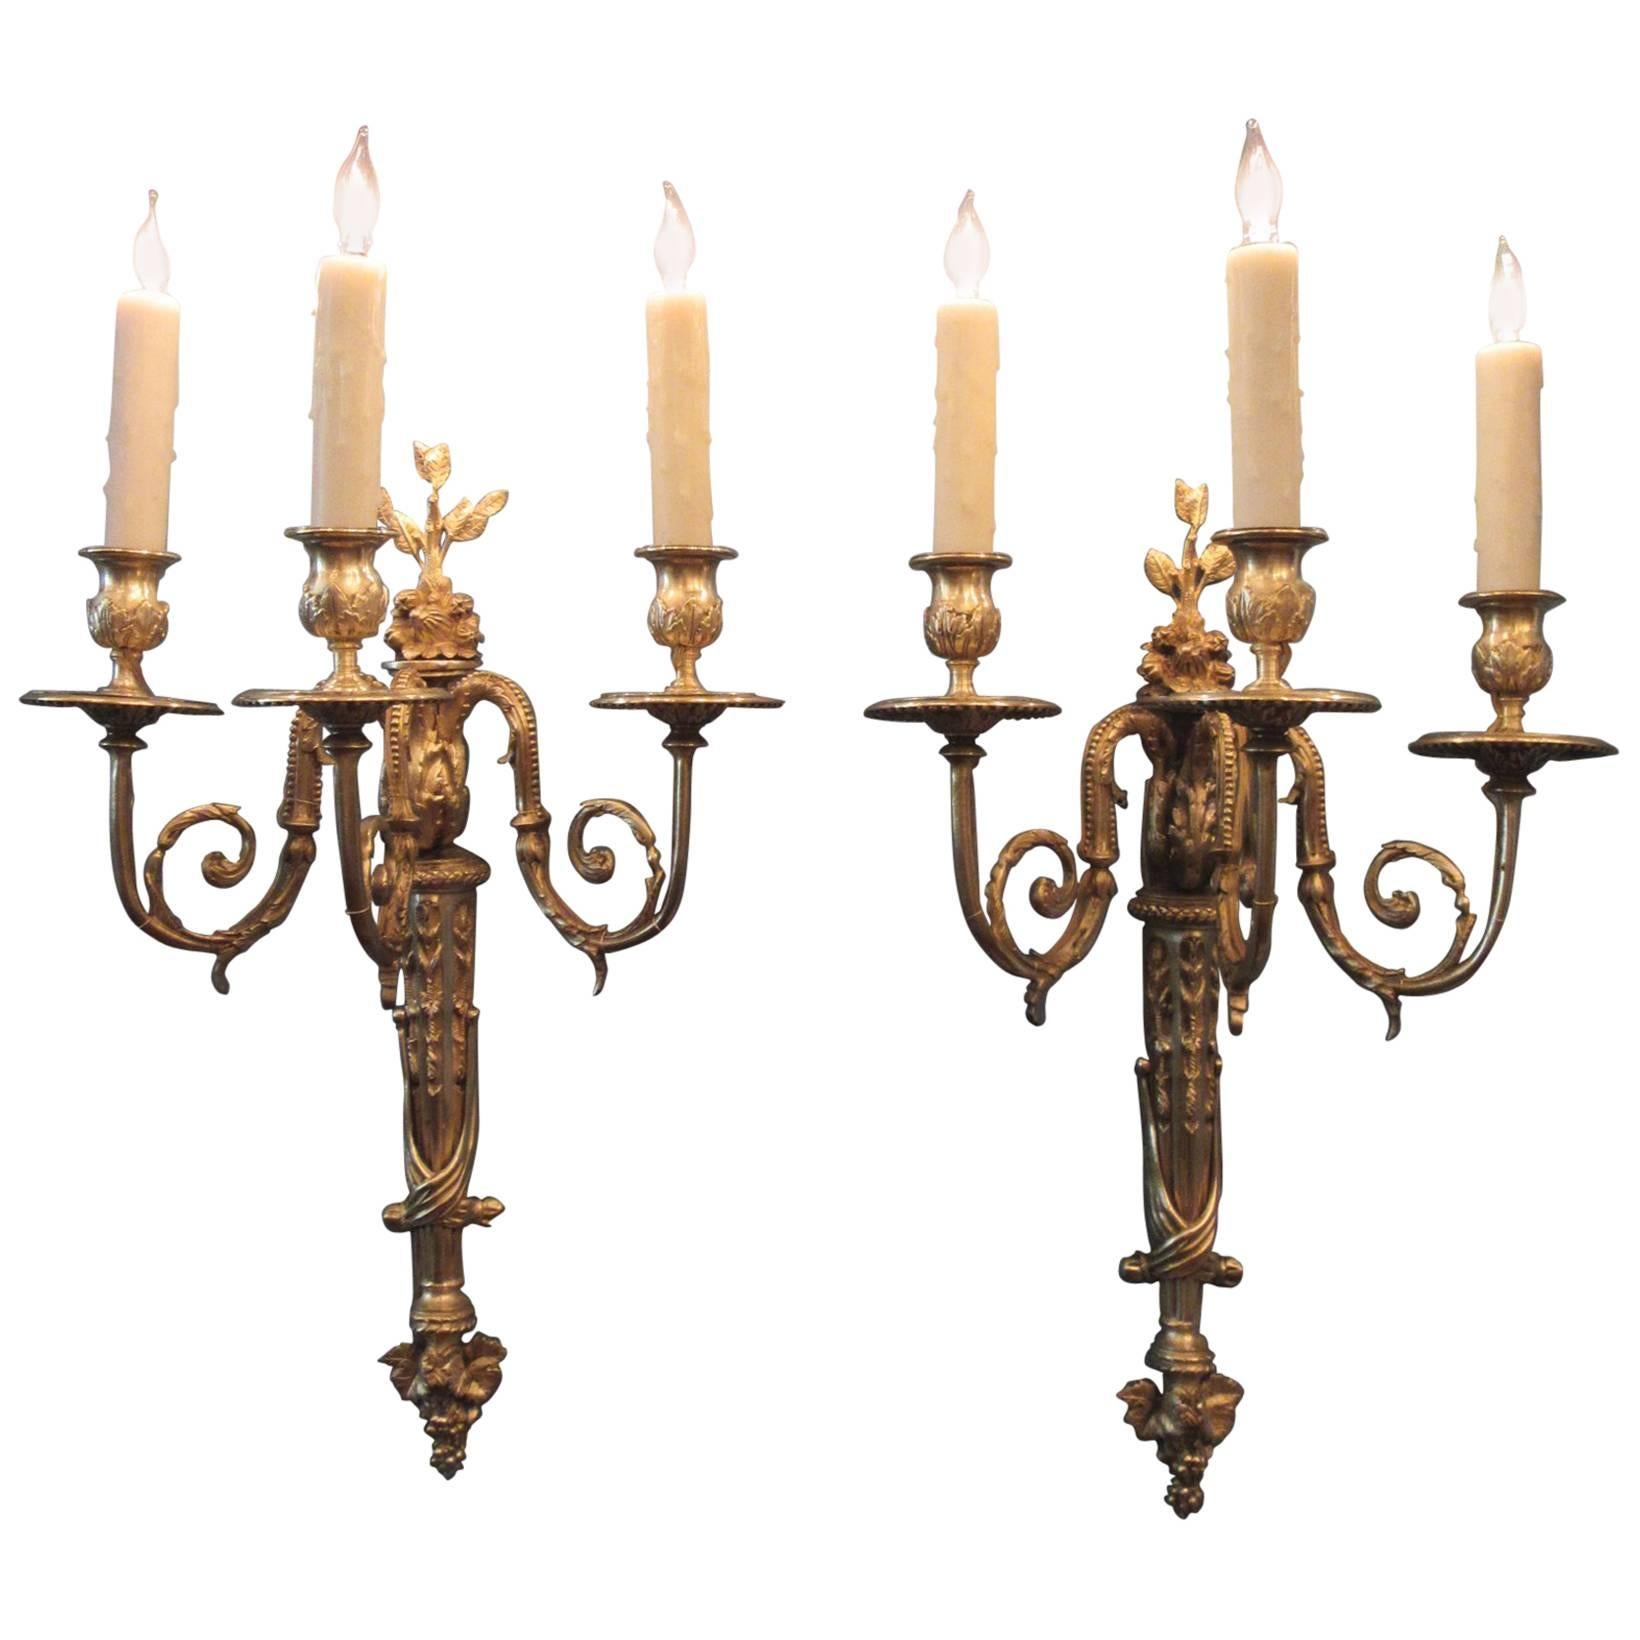 Pair of Early 19th Century French Regence Bronze Dore Sconces with Grapes